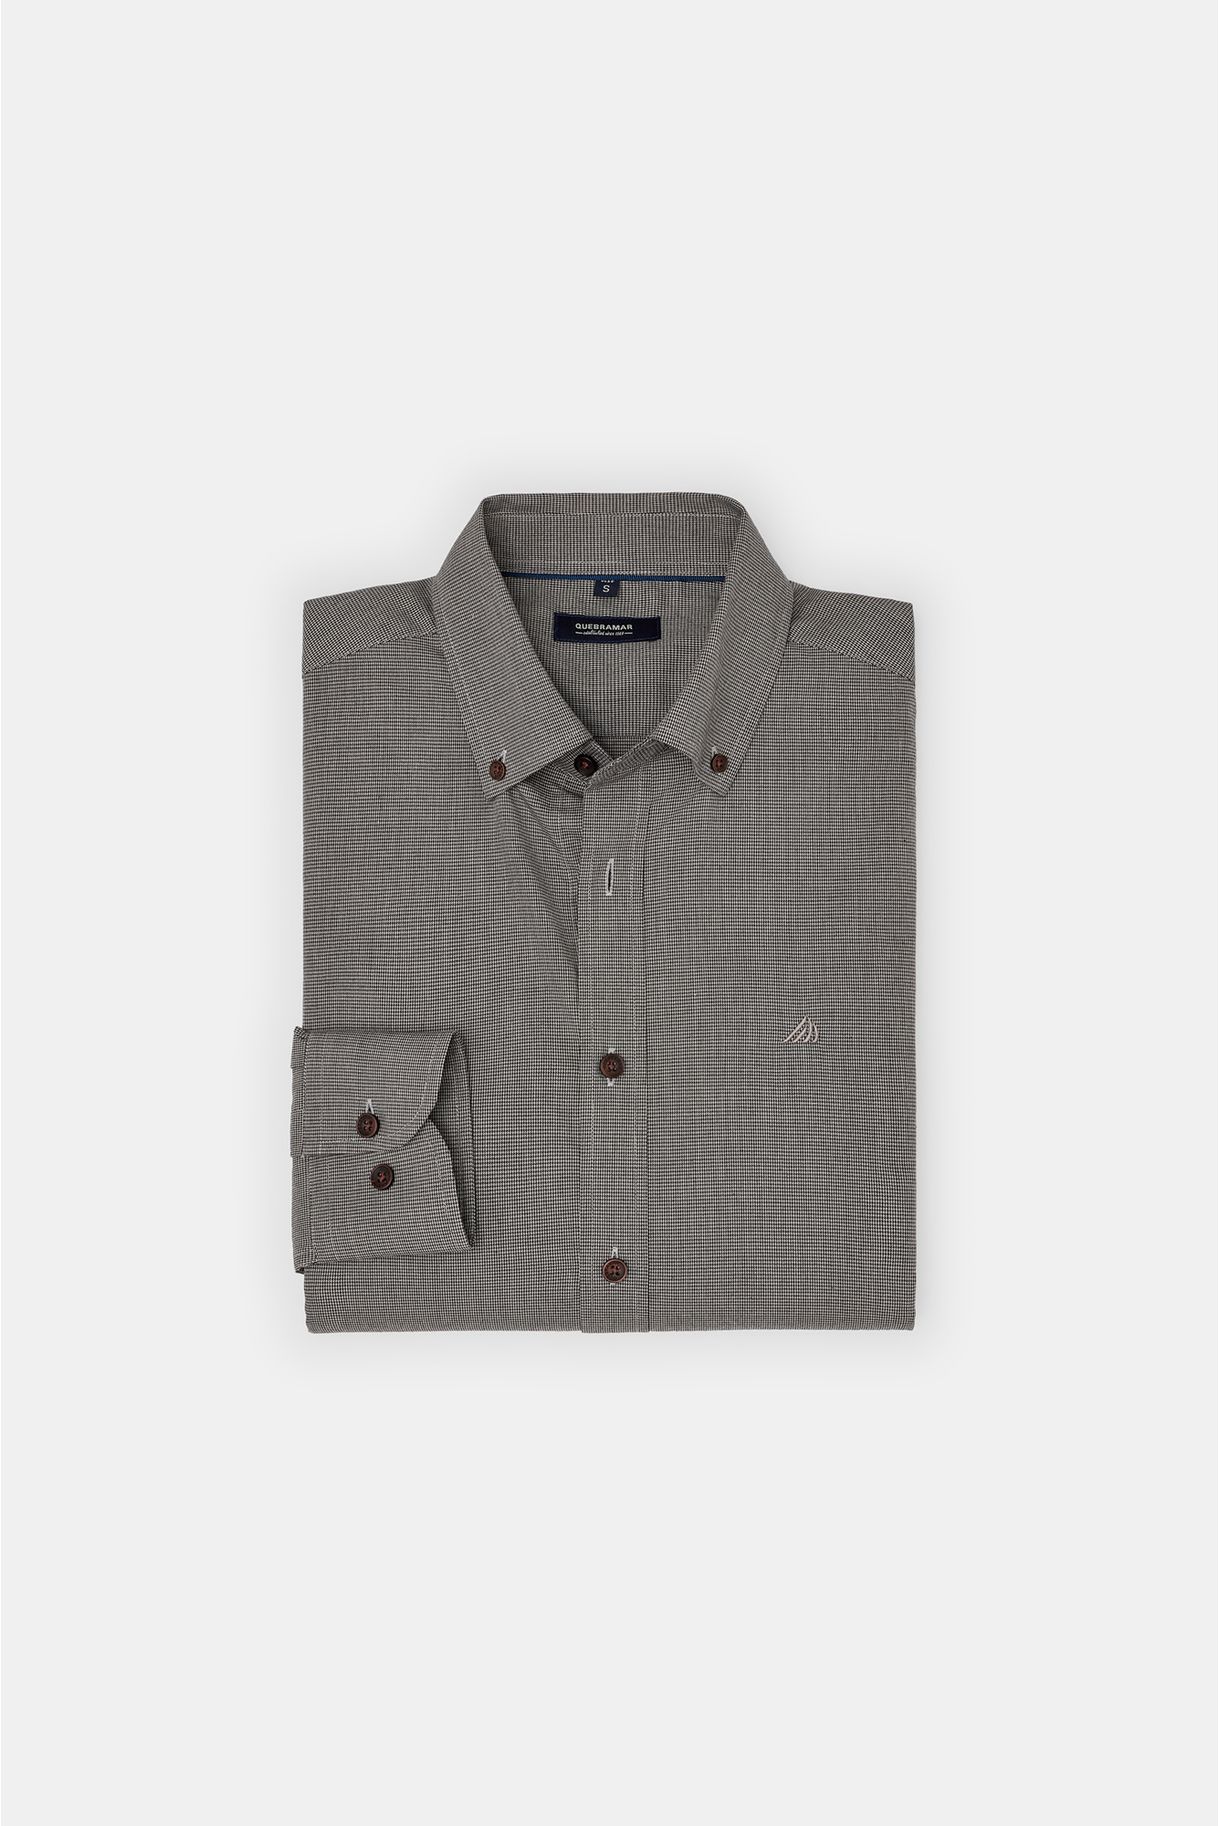 Men's shirt with structure